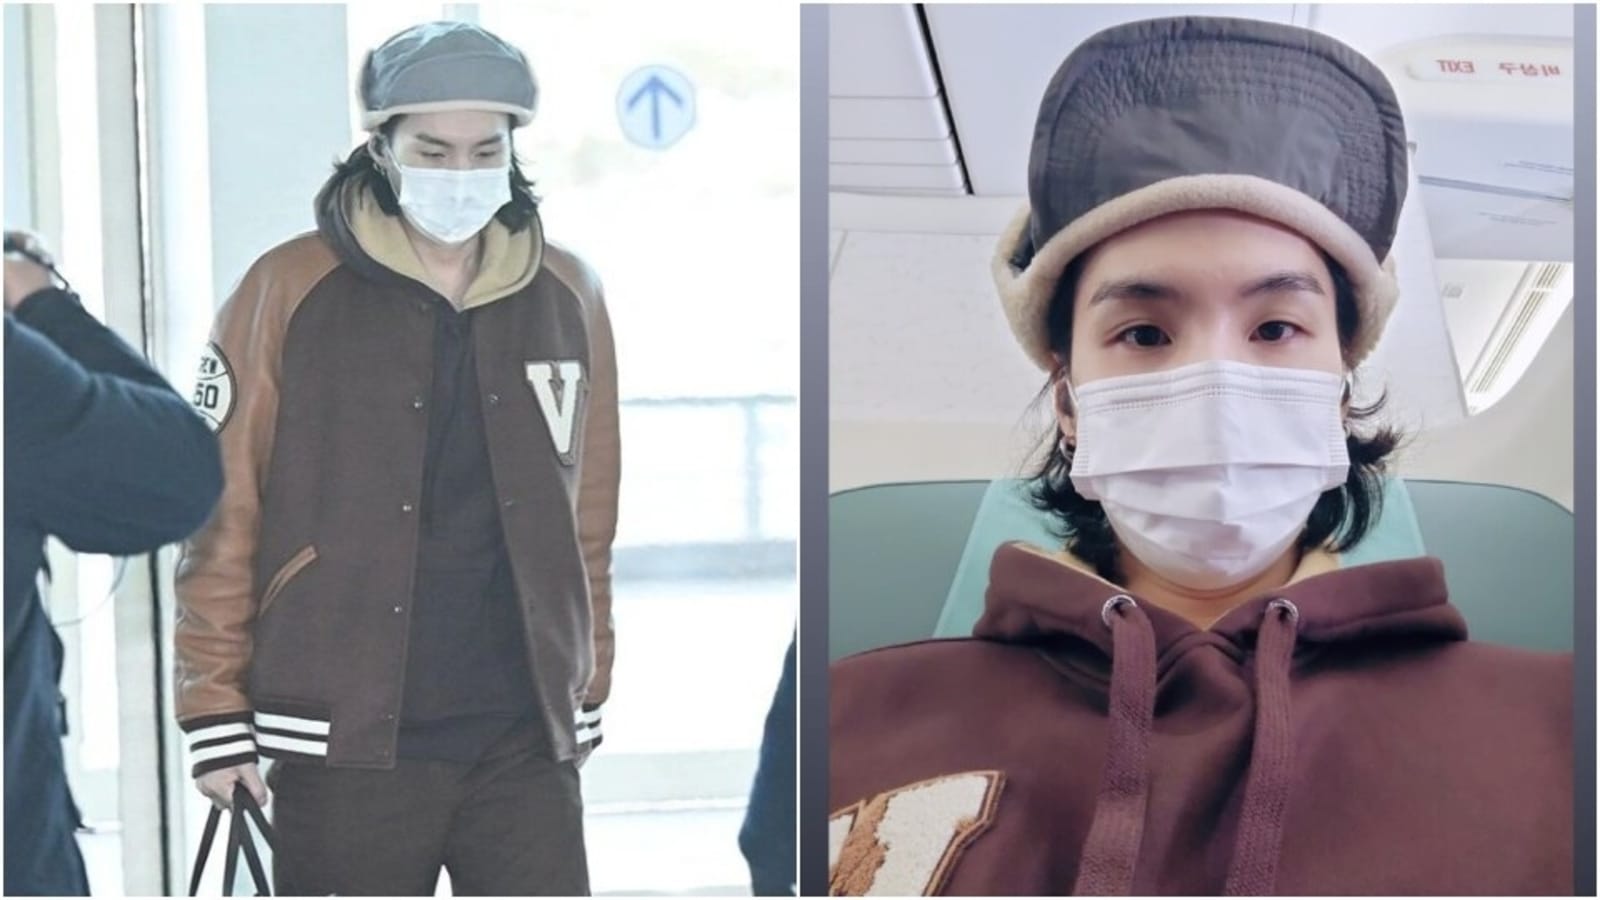 BTS Suga's Most Iconic Airport Looks